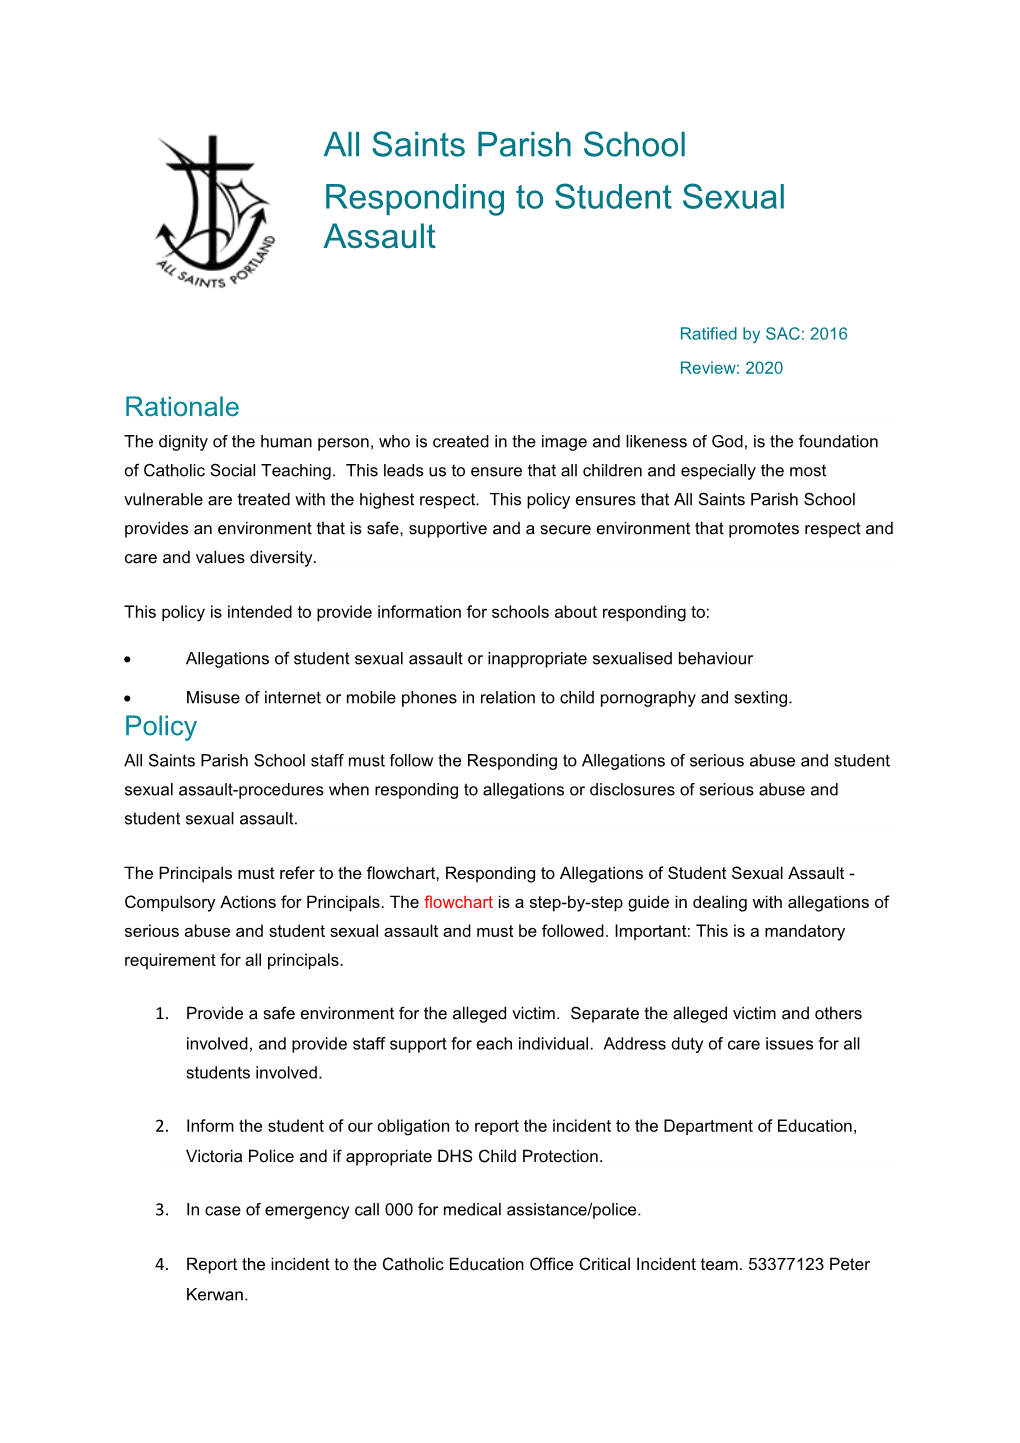 Responding to Student Sexual Assault